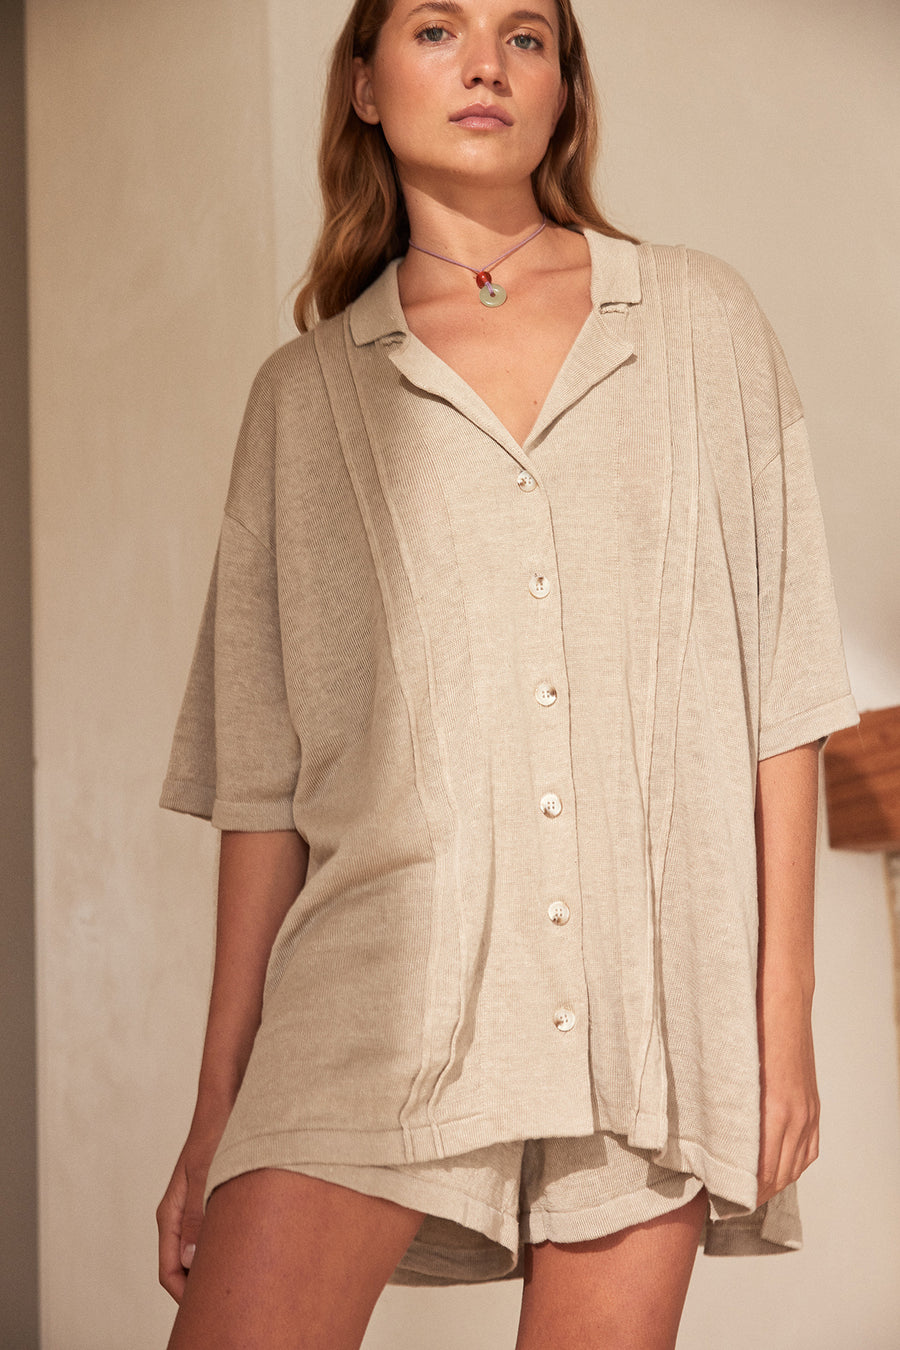 ARCAA DARCY SHIRT TAUPE Oversized shirt style, Open collar, Front pleat detail, Linen knit, Button down, Minimal waste knit construction, Soft 